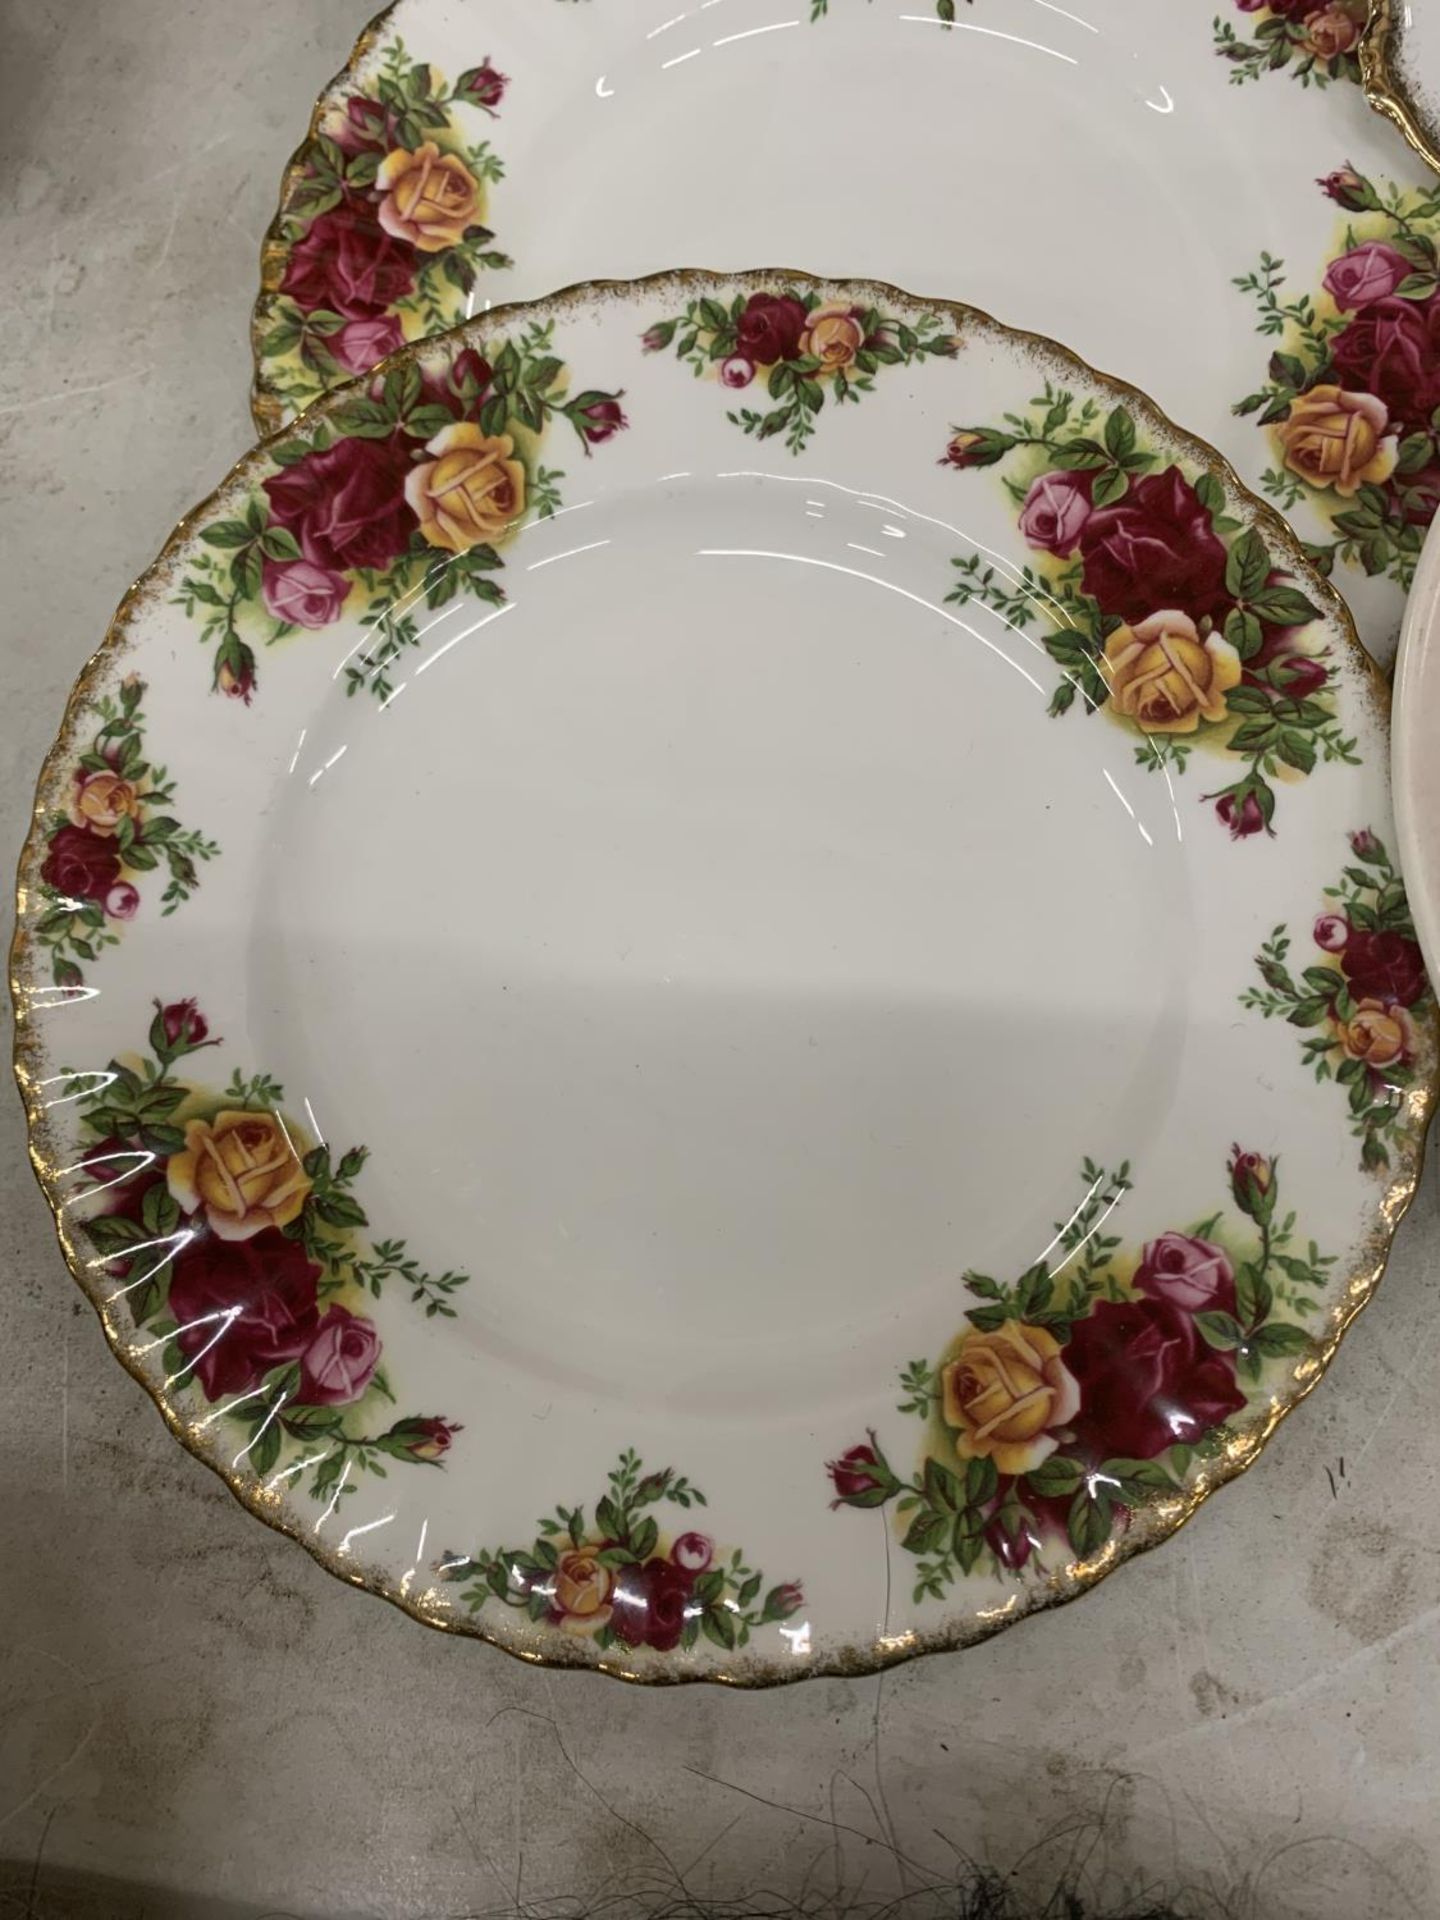 A QUANTITY OF VINTAGE PLATES TO INCLUDE ROYAL ALBERT 'OLD COUNTRY ROSES', PETER RABBIT, A CAKE - Image 2 of 6